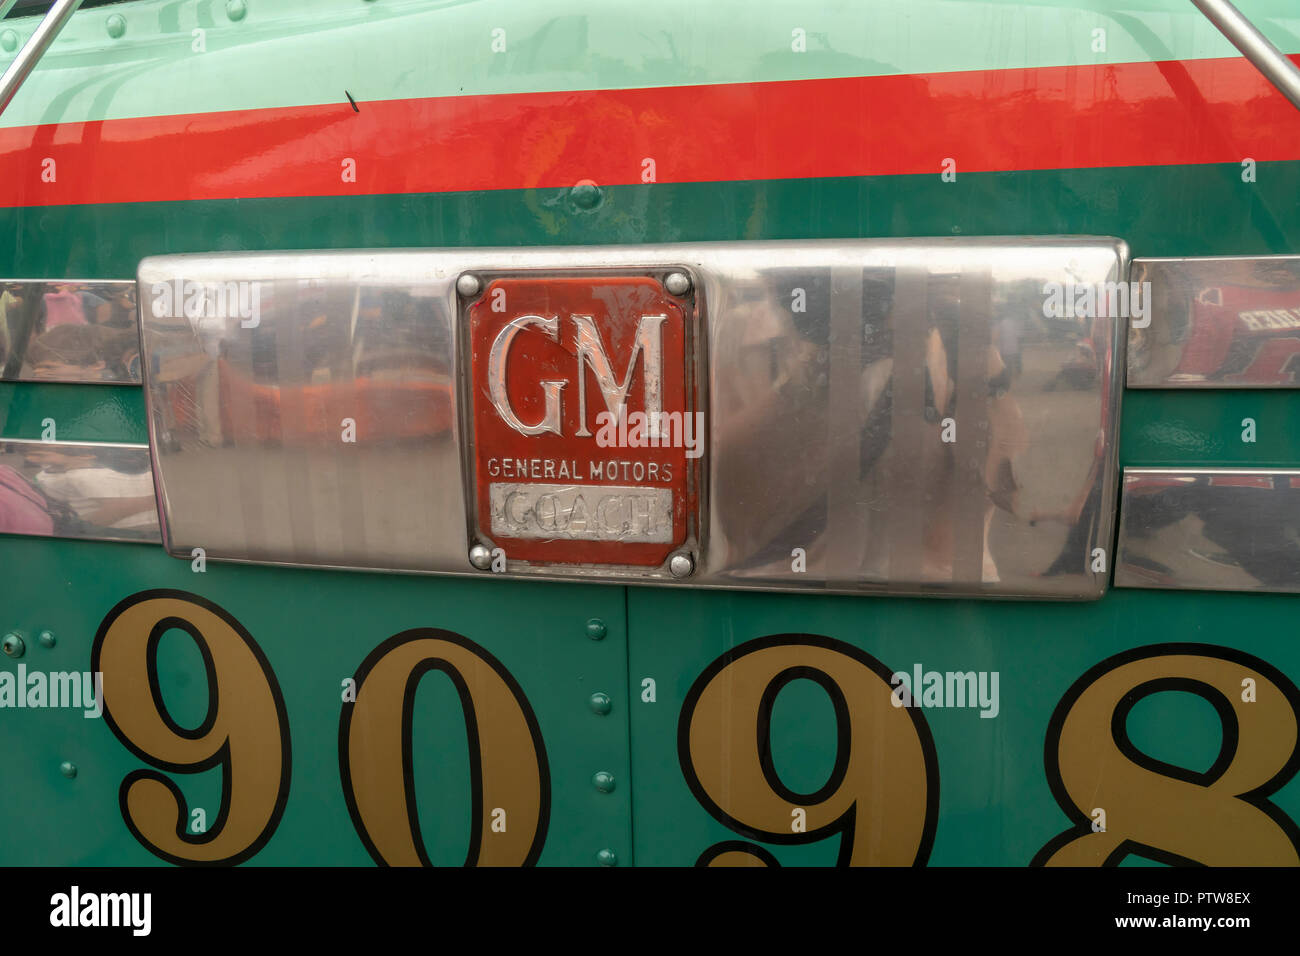 GM Coach Division logo on a bus at the 25th Annual New York City Transit Museum Bus Festival in Brooklyn Bridge Park in Brooklyn in New York on Sunday, October 7, 2018. Once a year the museum rolls out its fleet of vintage buses dating from the early 20th century to the most current vehicles allowing people to reminisce and wallow in nostalgia for the vehicles, which become a sort of time machine taking visitors back to another era. (Â© Richard B. Levine) Stock Photo